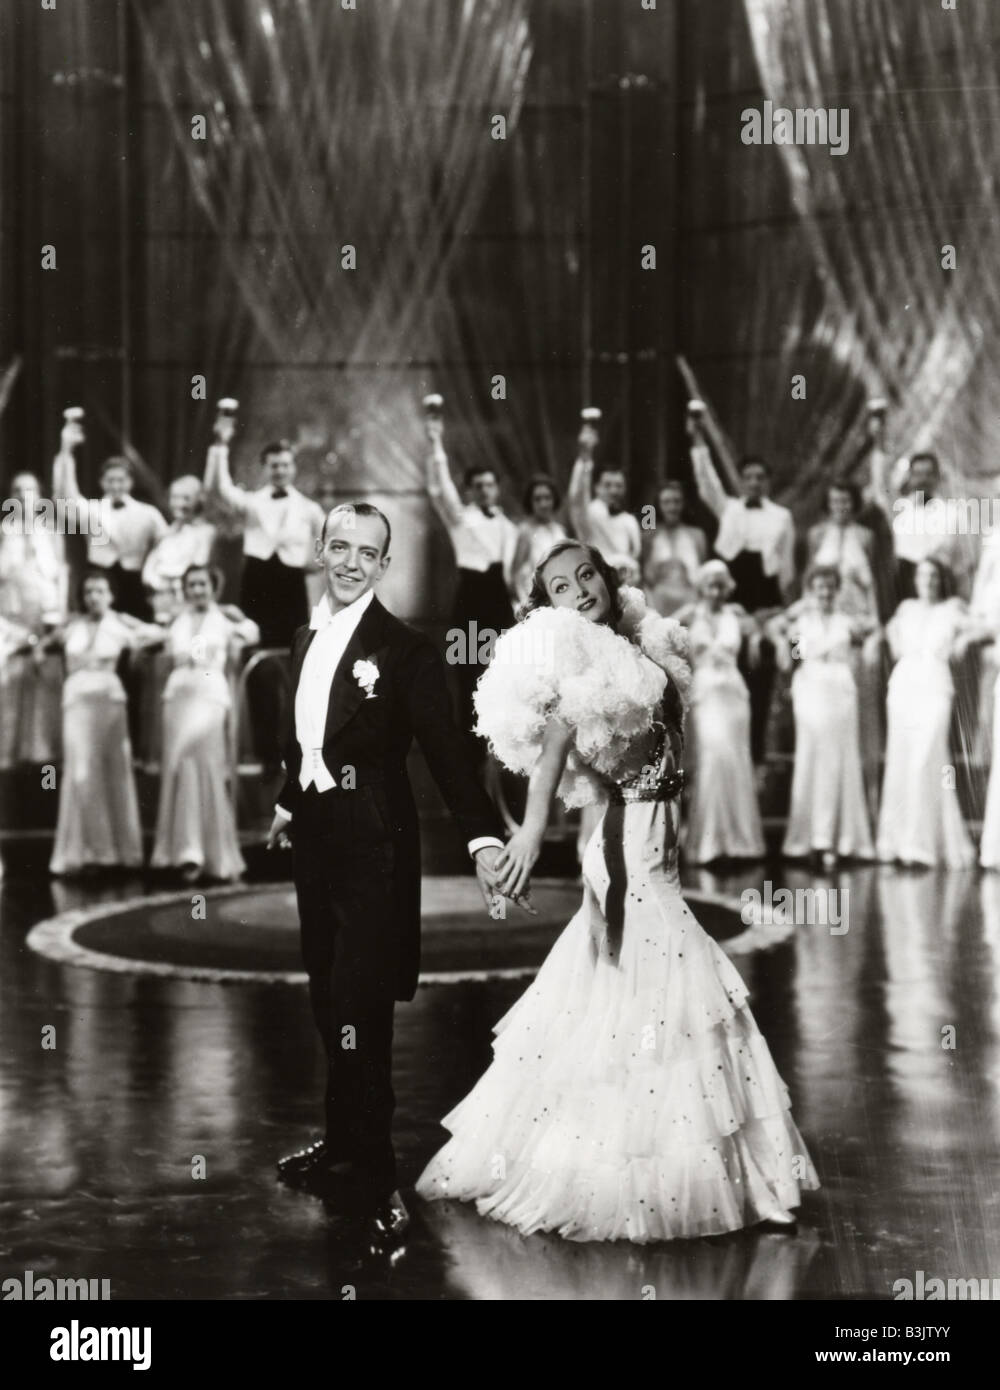 DANCING LADY 1933 MGM film avec Joan Crawford et Fred Astaire Banque D'Images